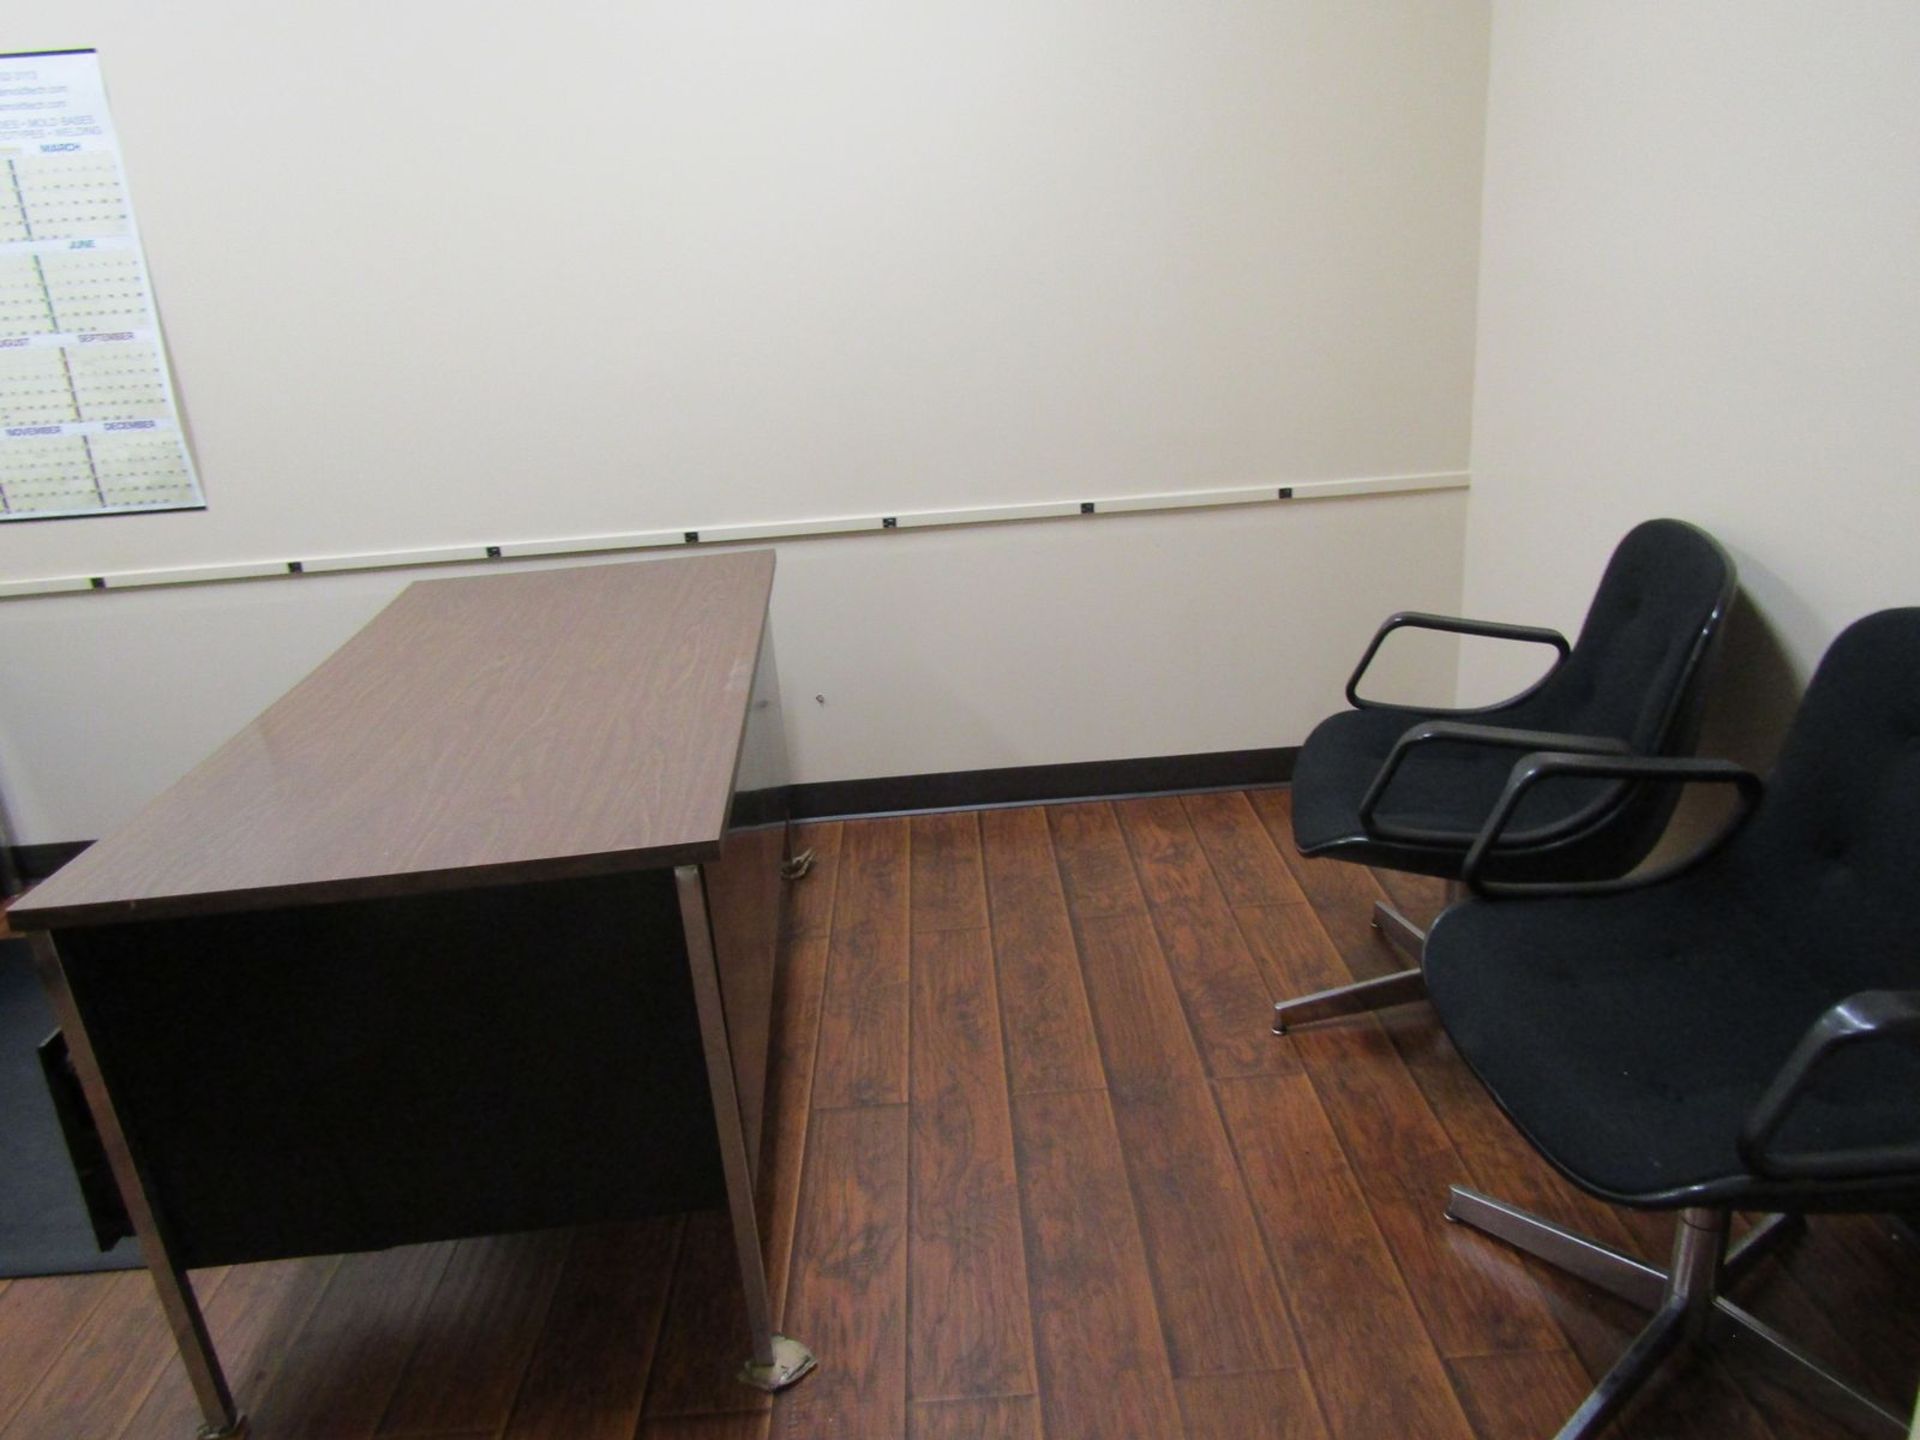 Lot - Contents of Office, to Include: (1) Desk, (1) Credenza, (3) Chairs, & (1) 2-Drawer Filing